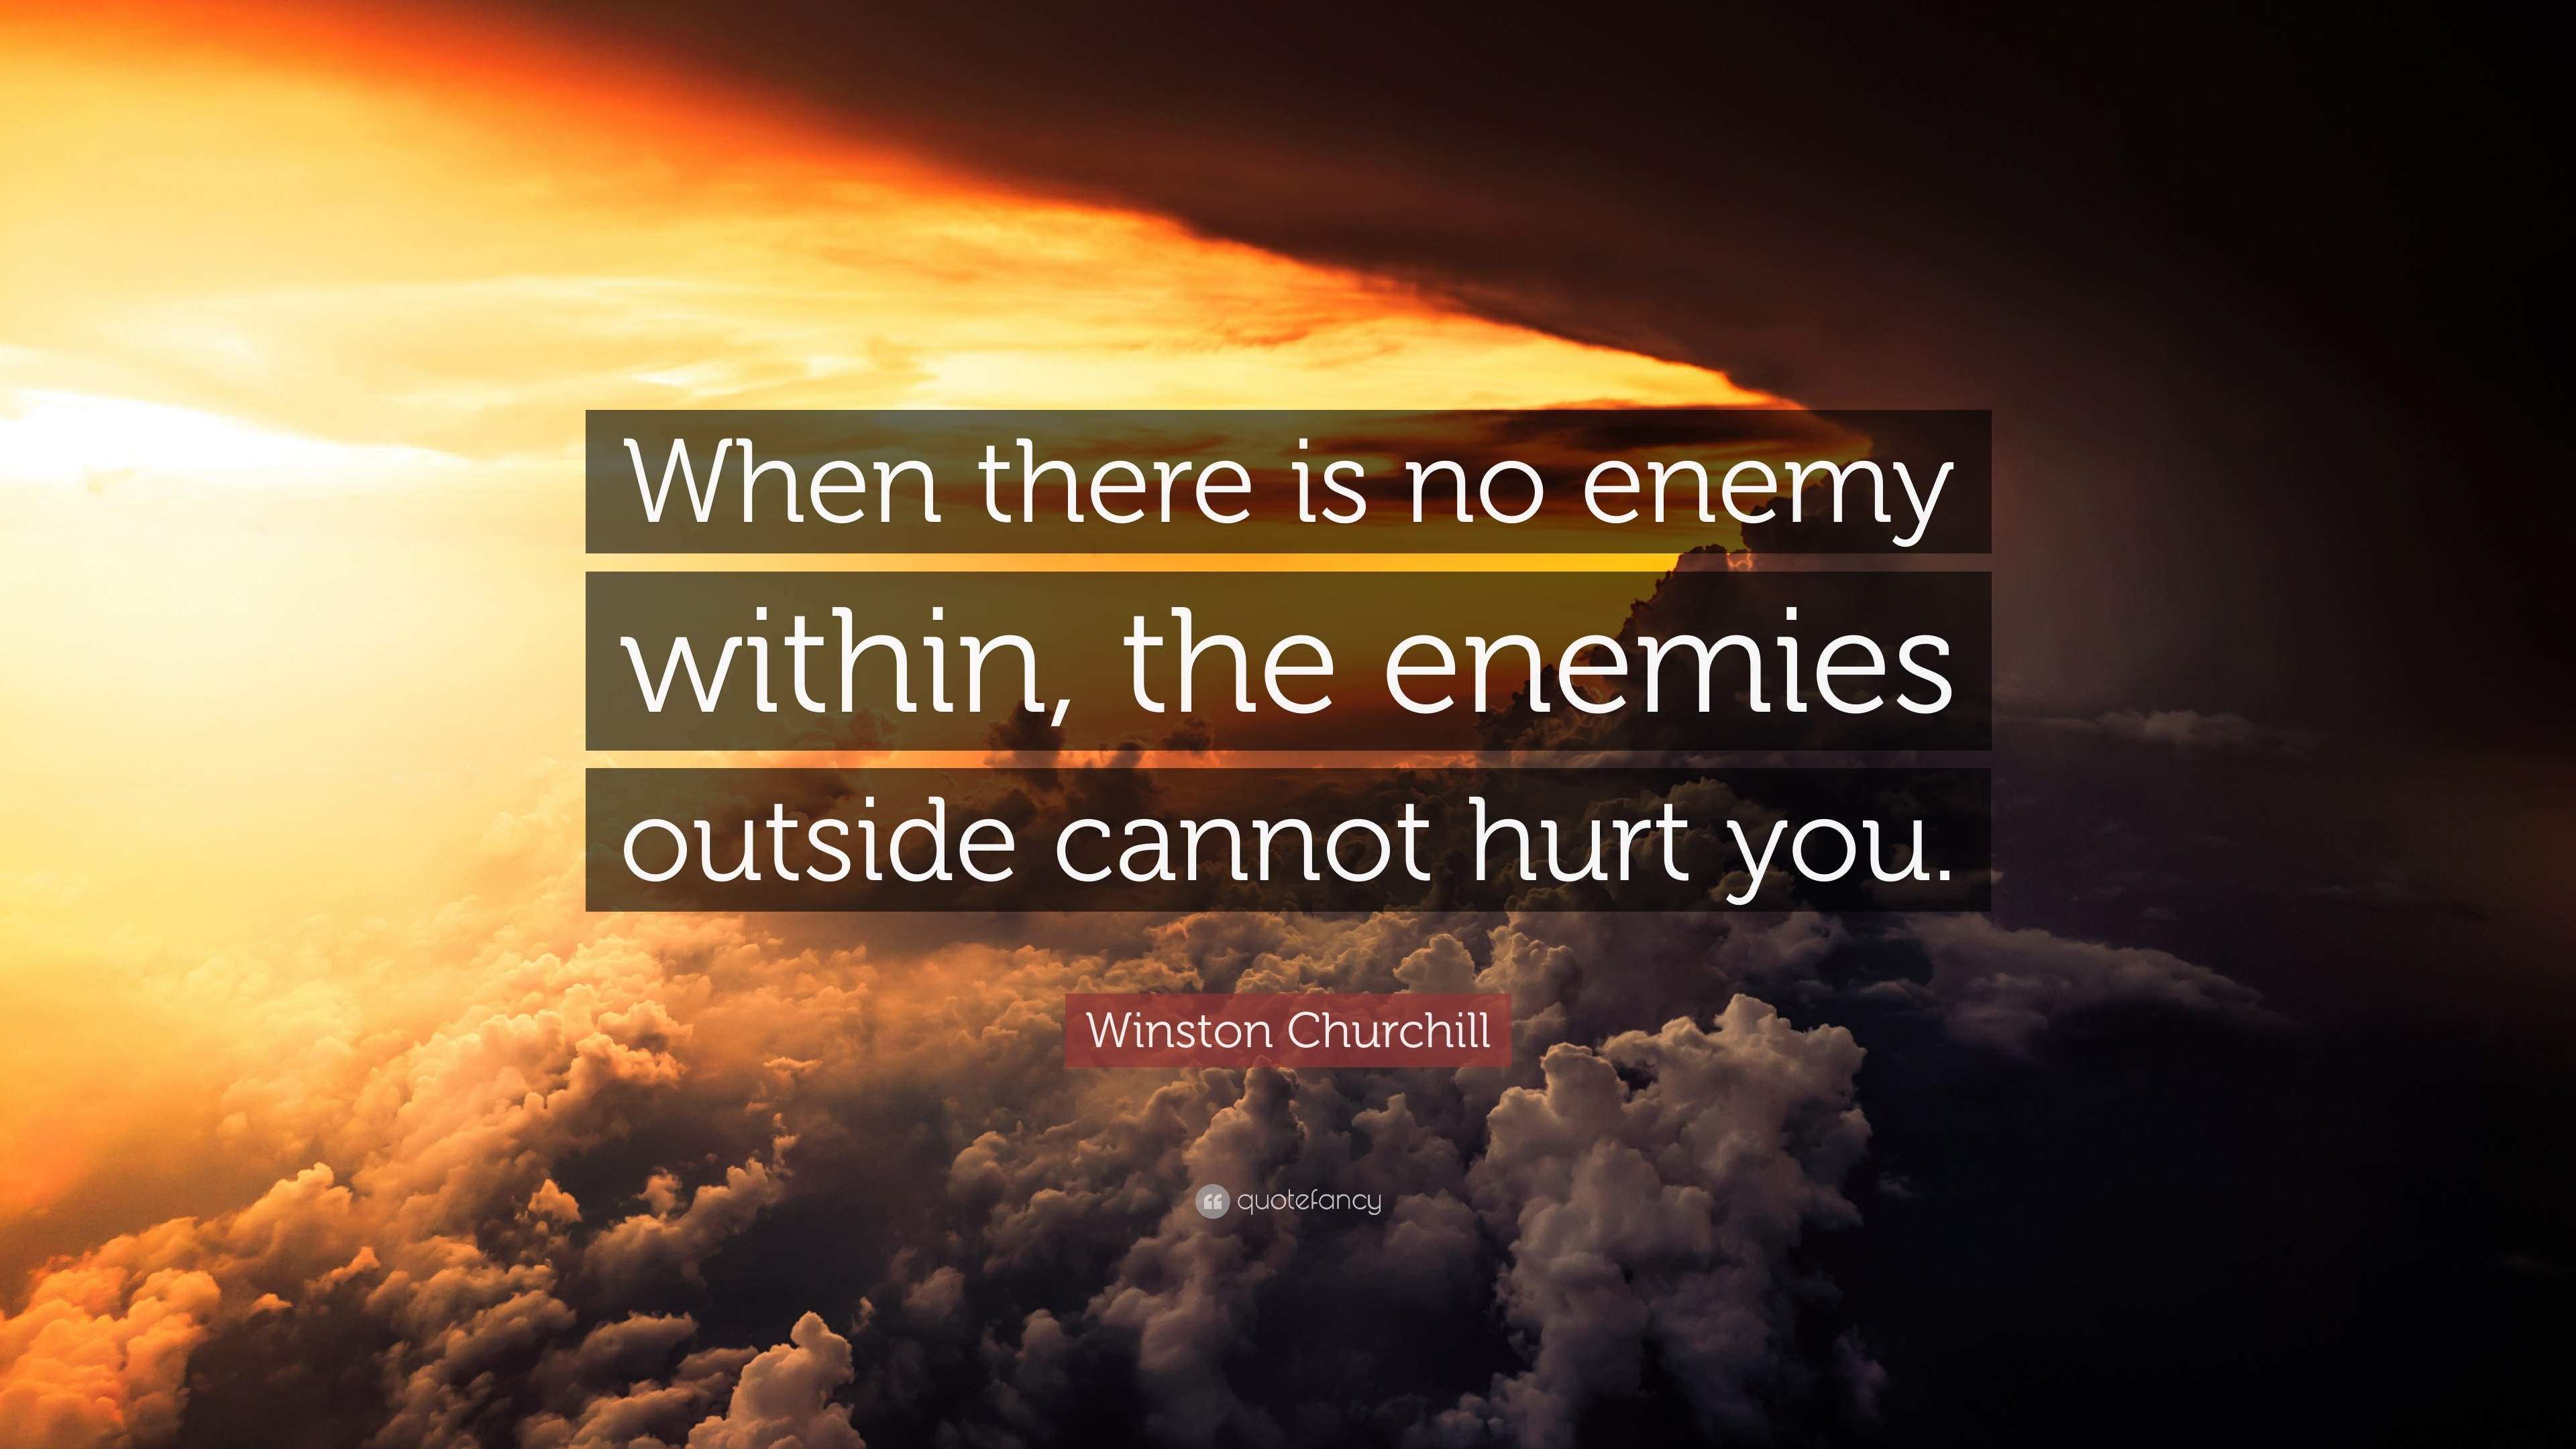 Winston Churchill Quote: “When there is no enemy within, the enemies